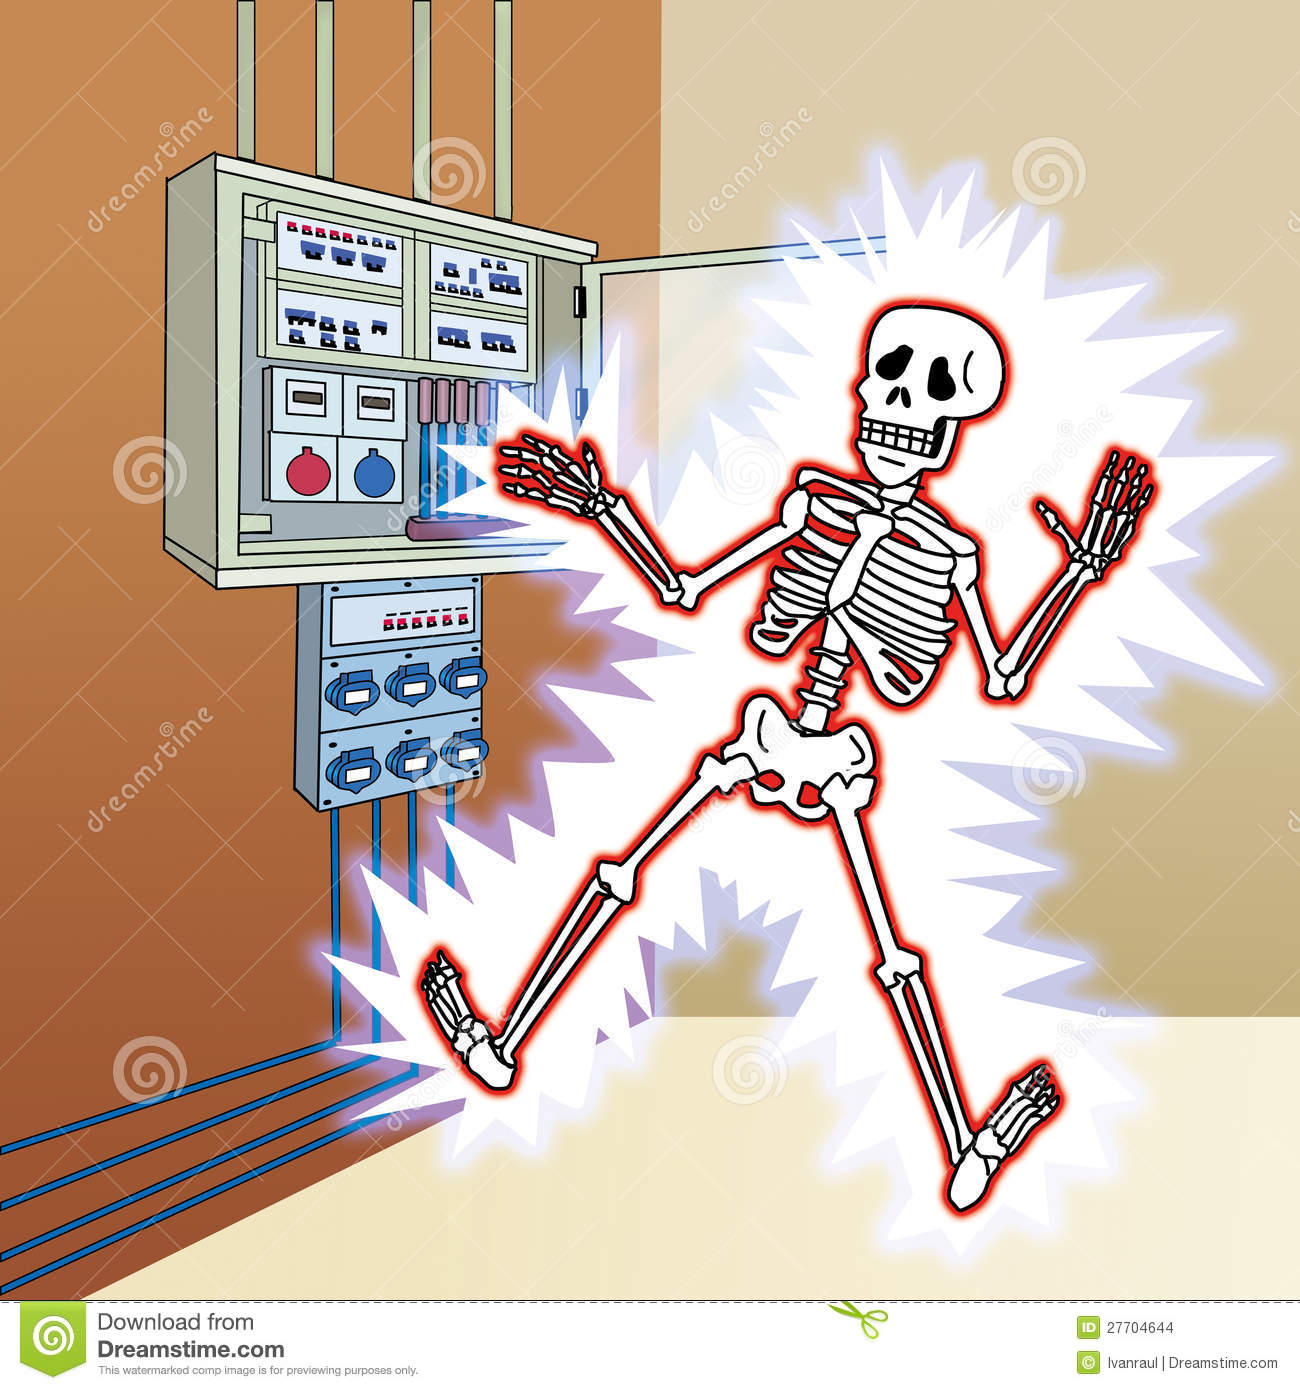 Skeleton With Electric Shock At The Control Panel Stock Images.